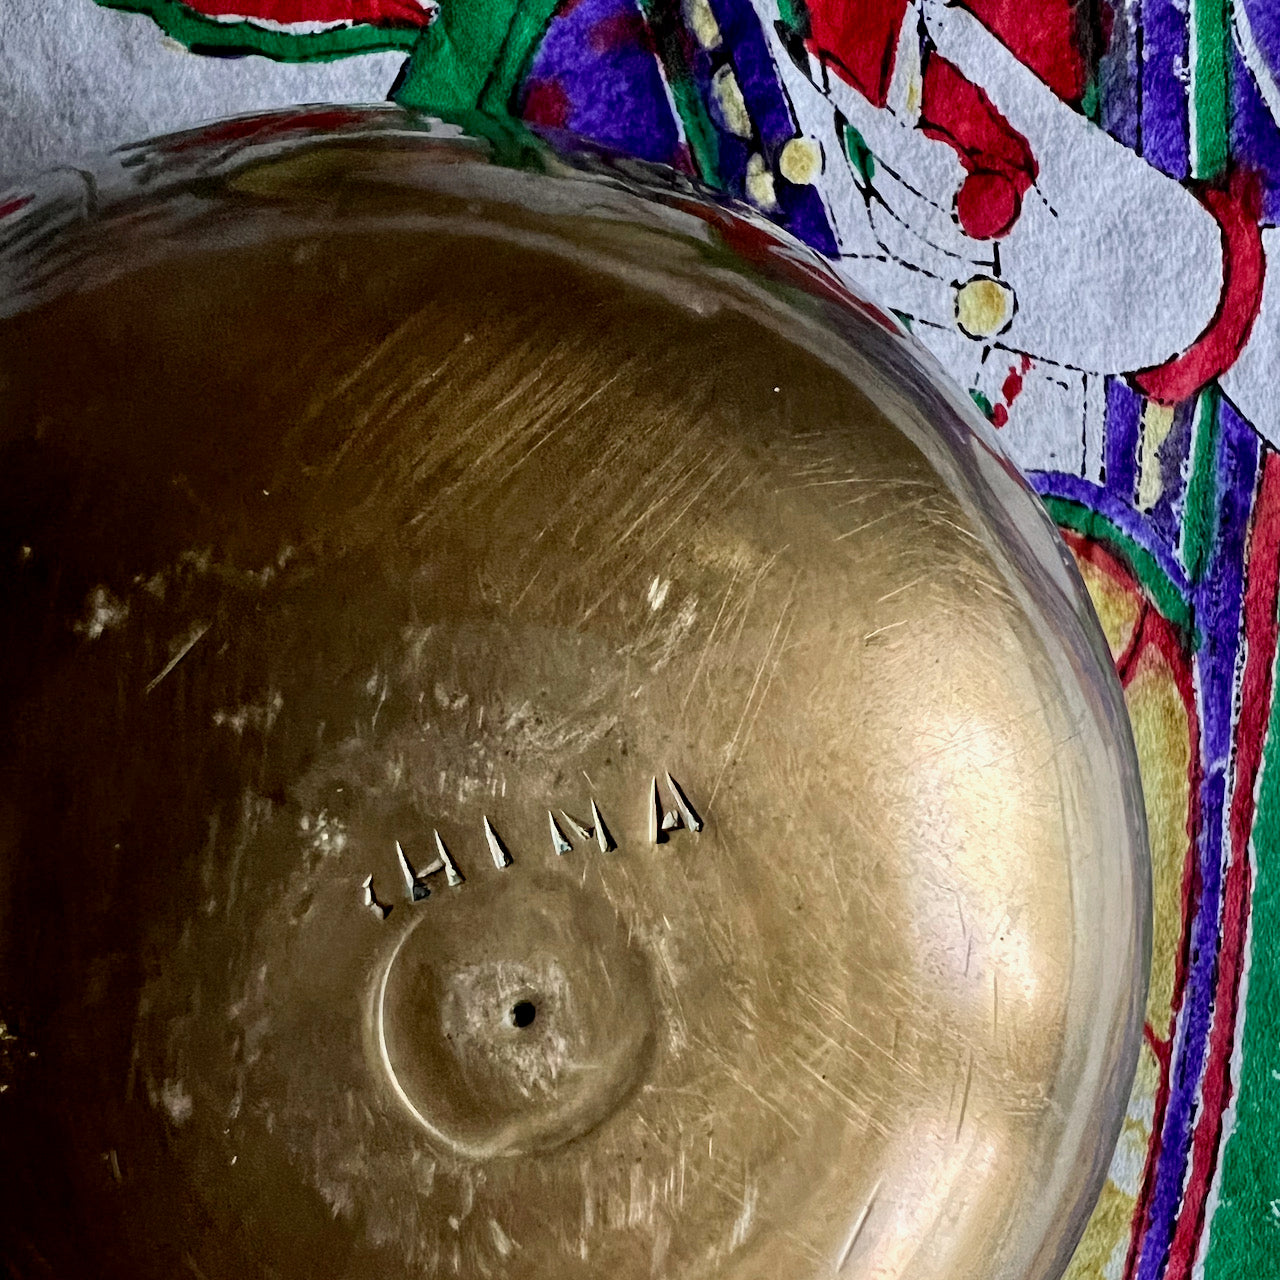 Vintage Etched Chinese Brass Bowl (c.1900s)